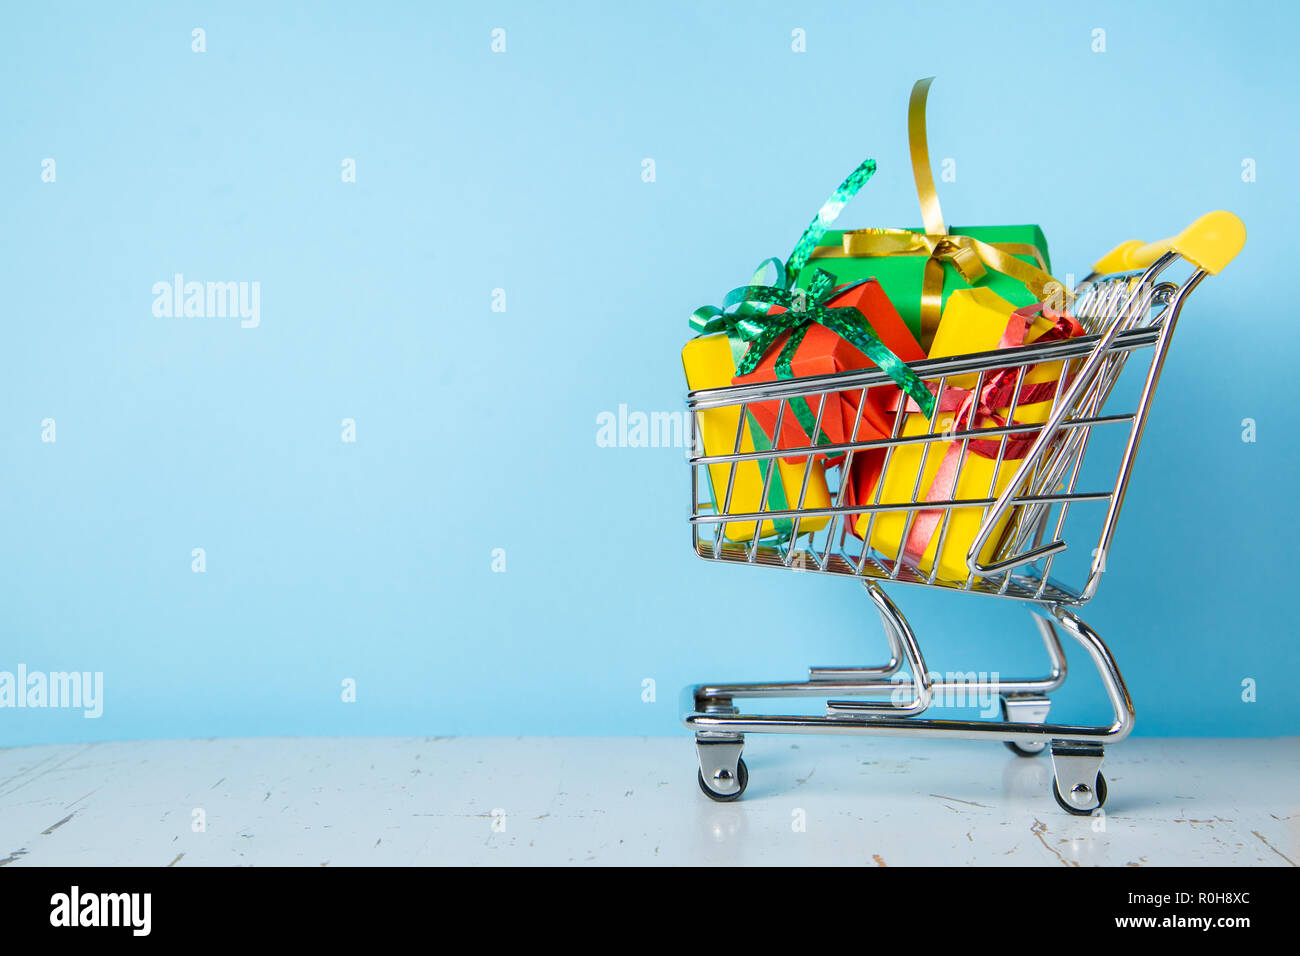 Ciber monday concept - trolley cart with christmas presents, blue background Stock Photo